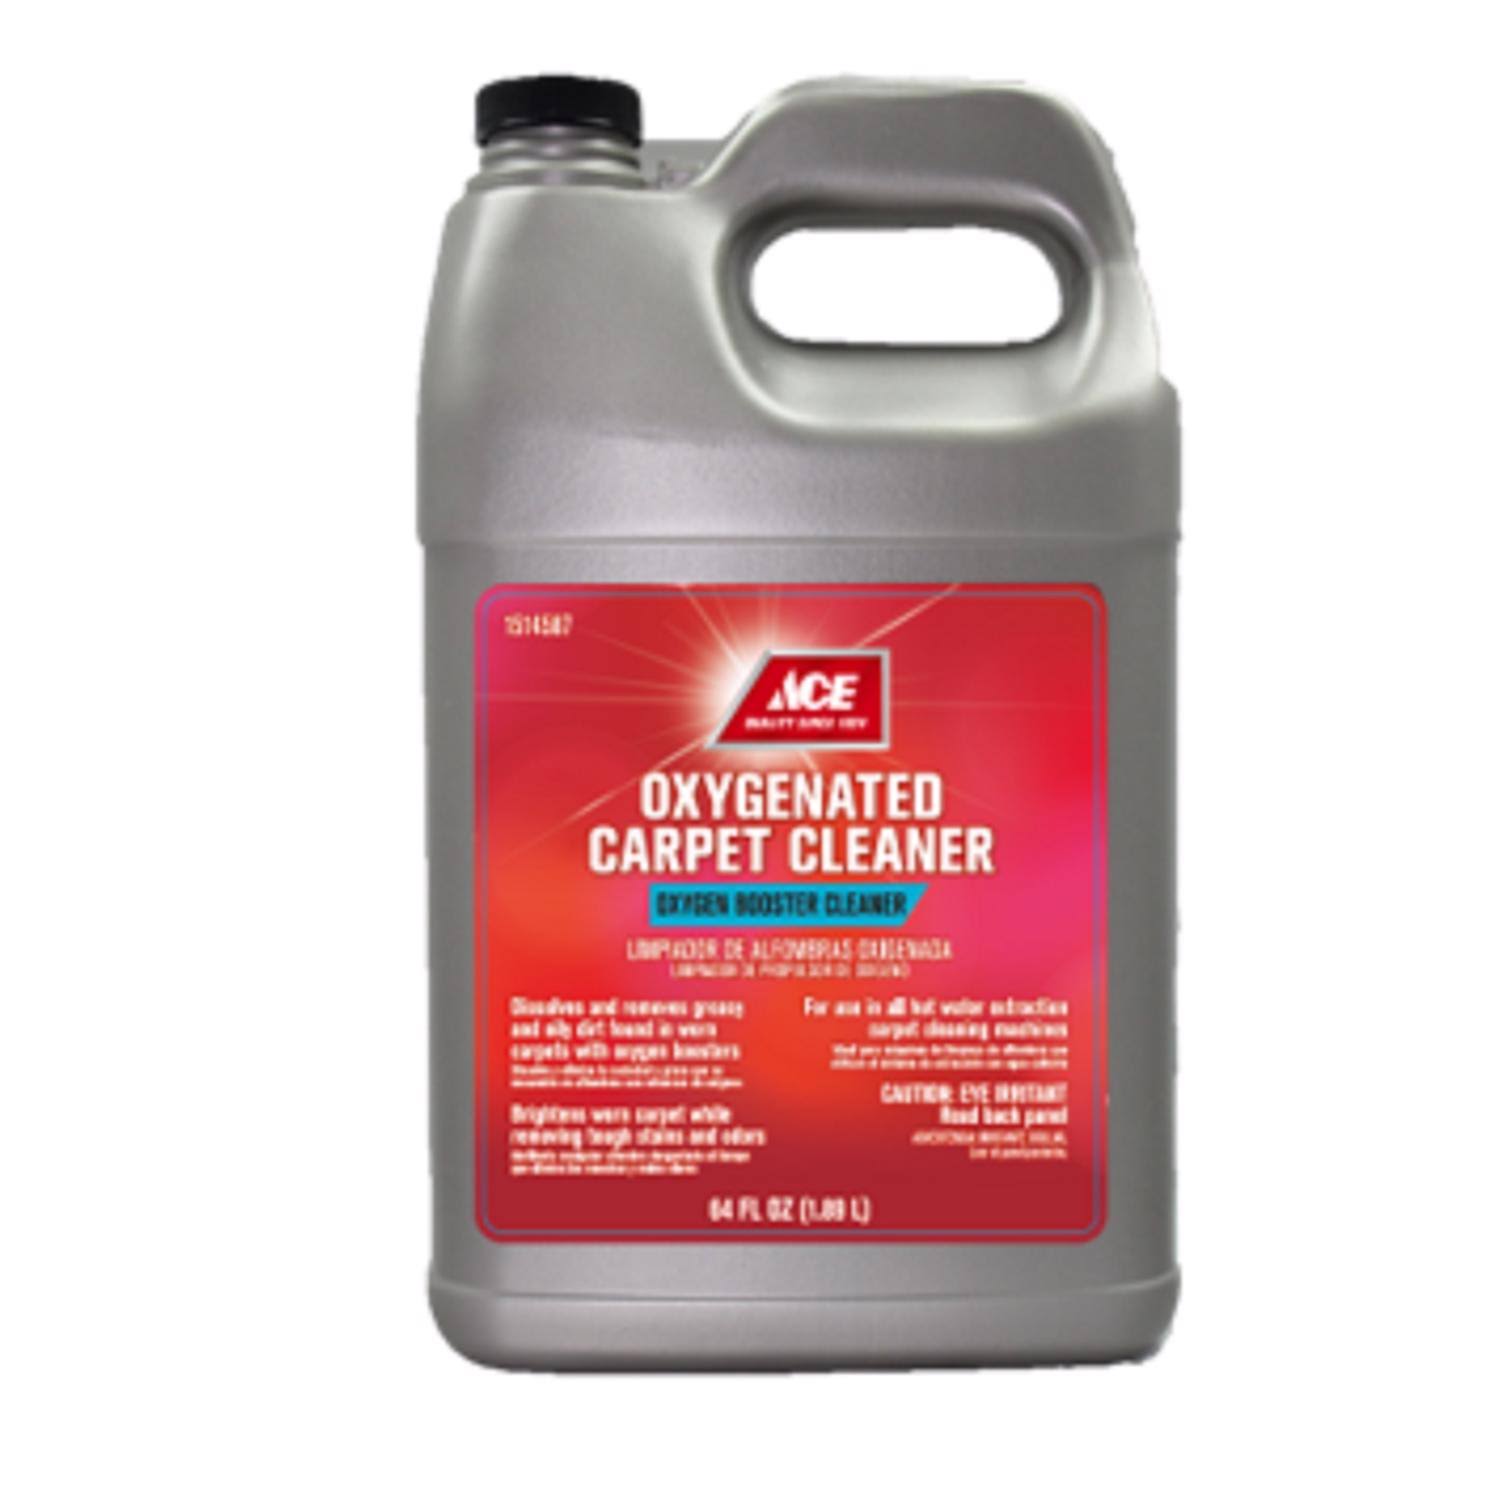 Ace Oxygenated Max Carpet Cleaner - 64oz